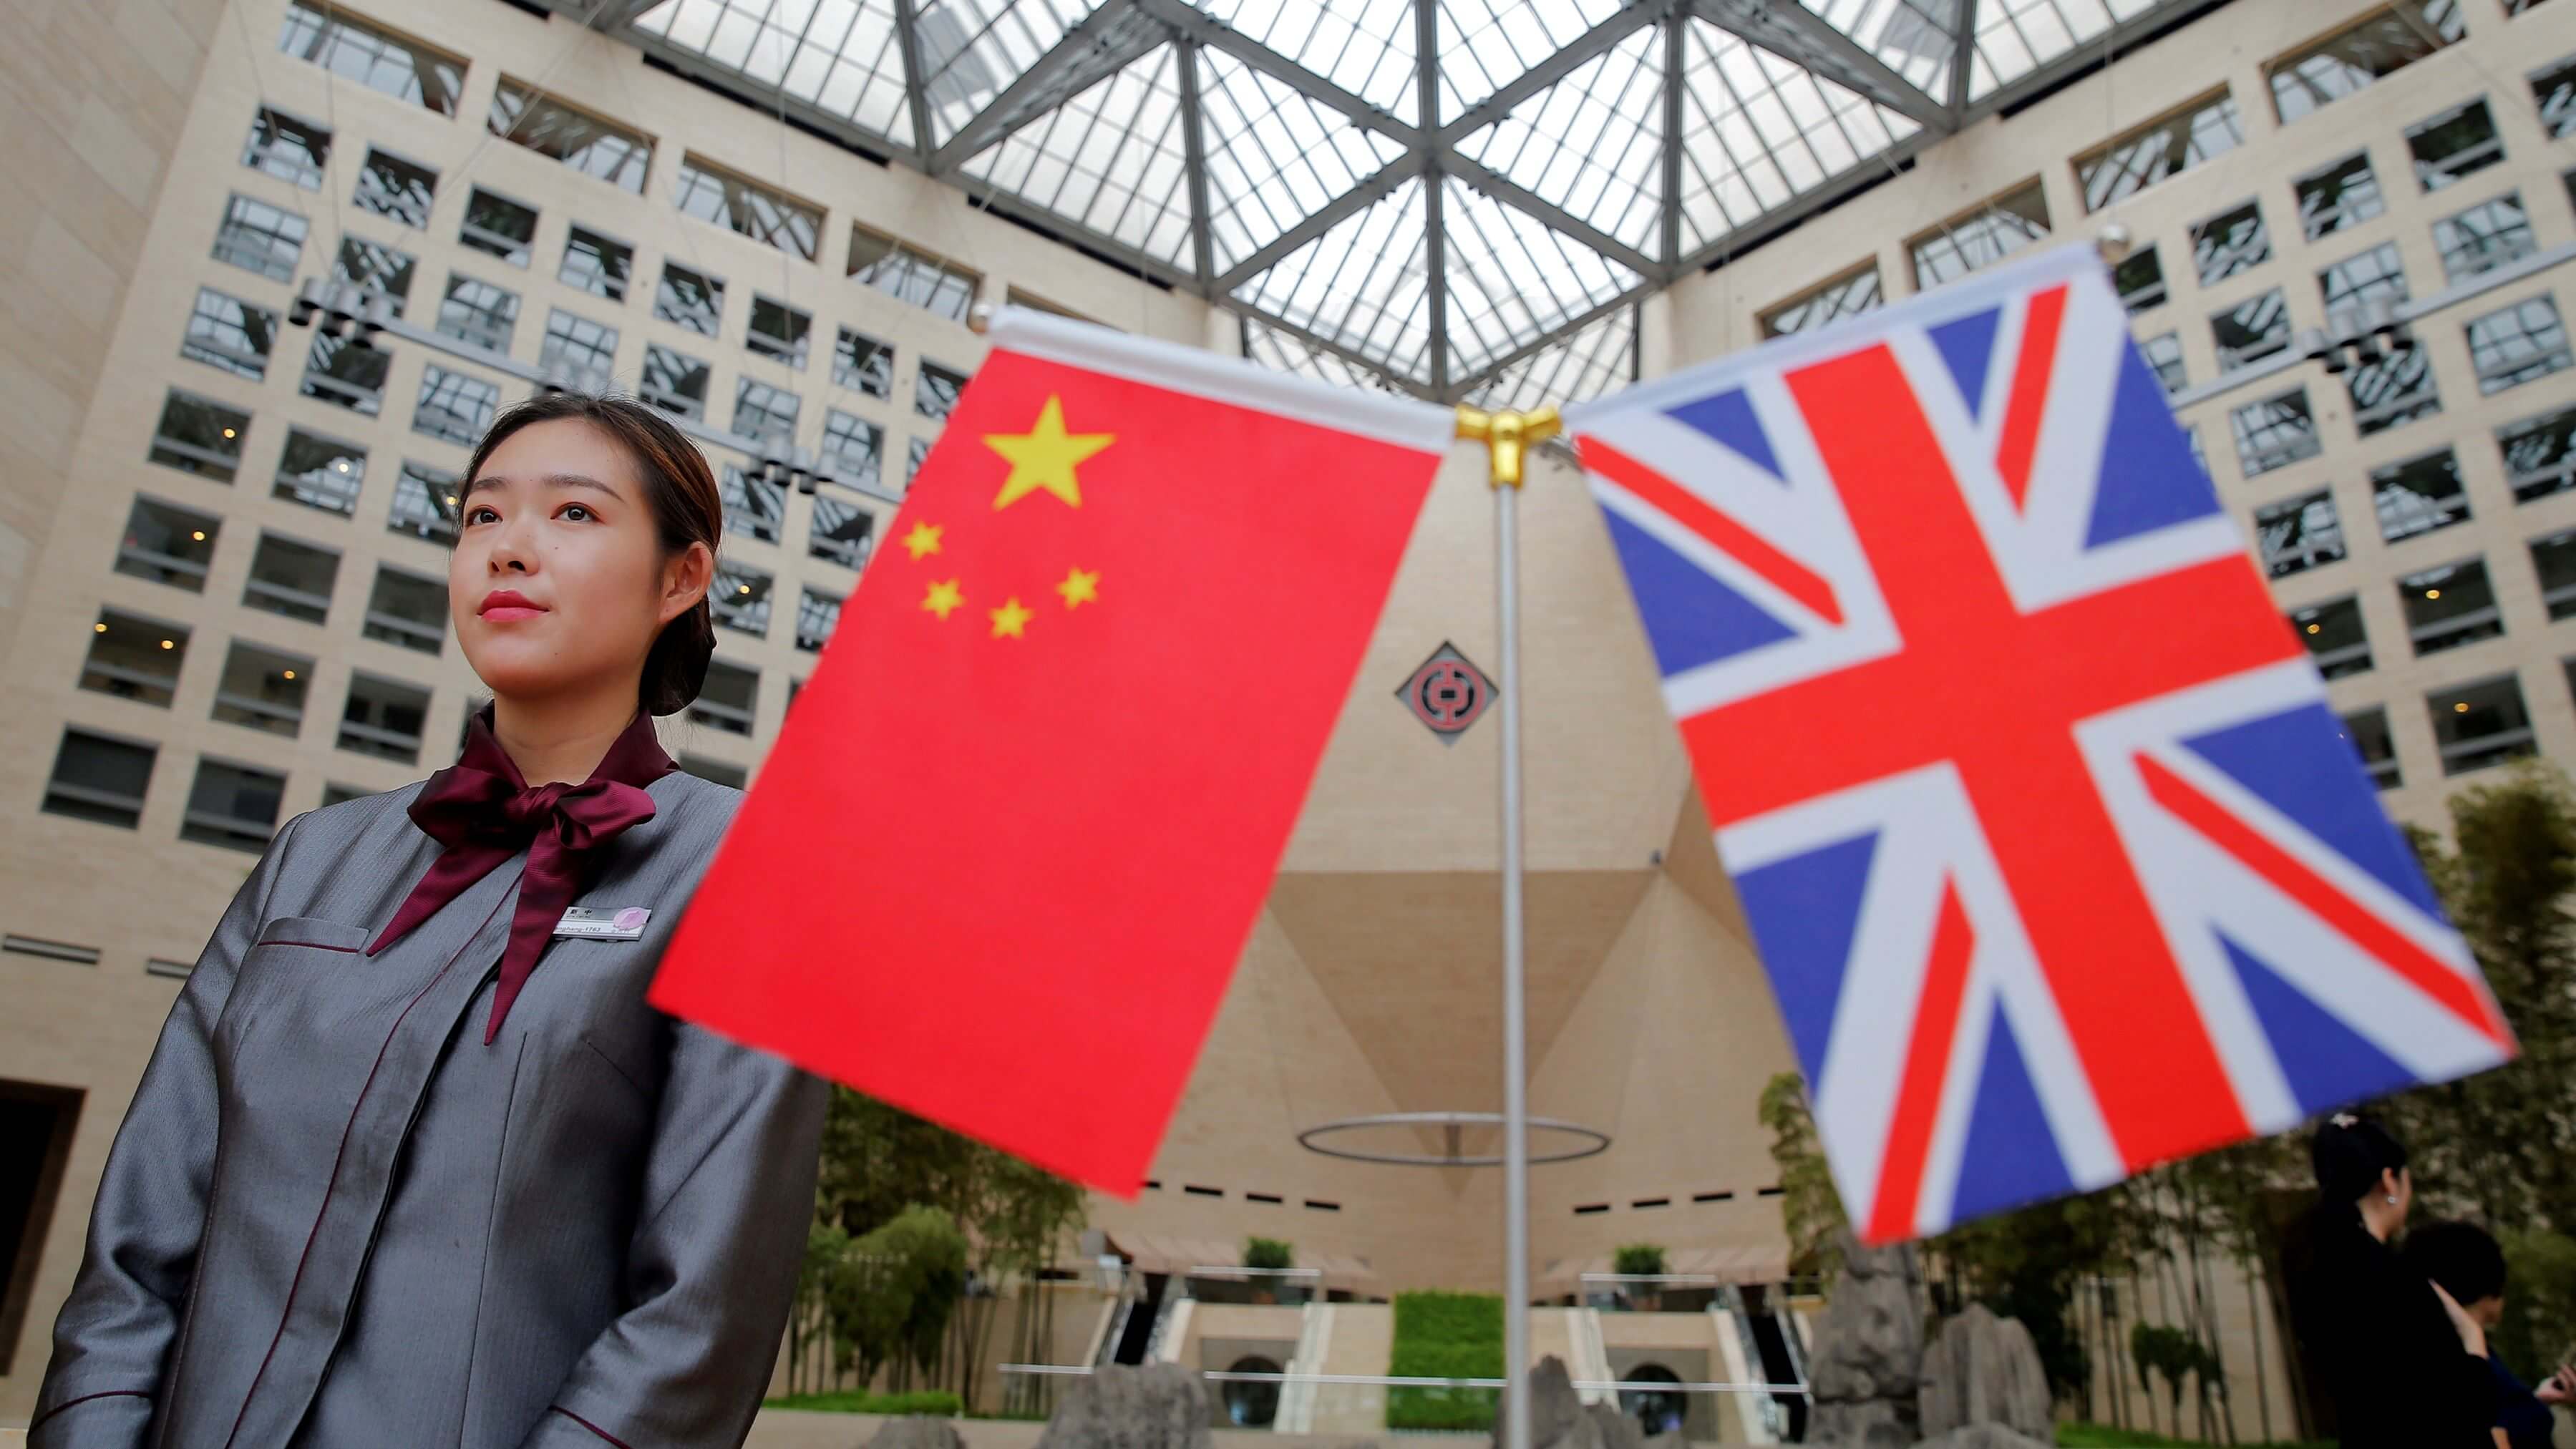 Majority Of British Firms Cautious On New Investments In China - survey